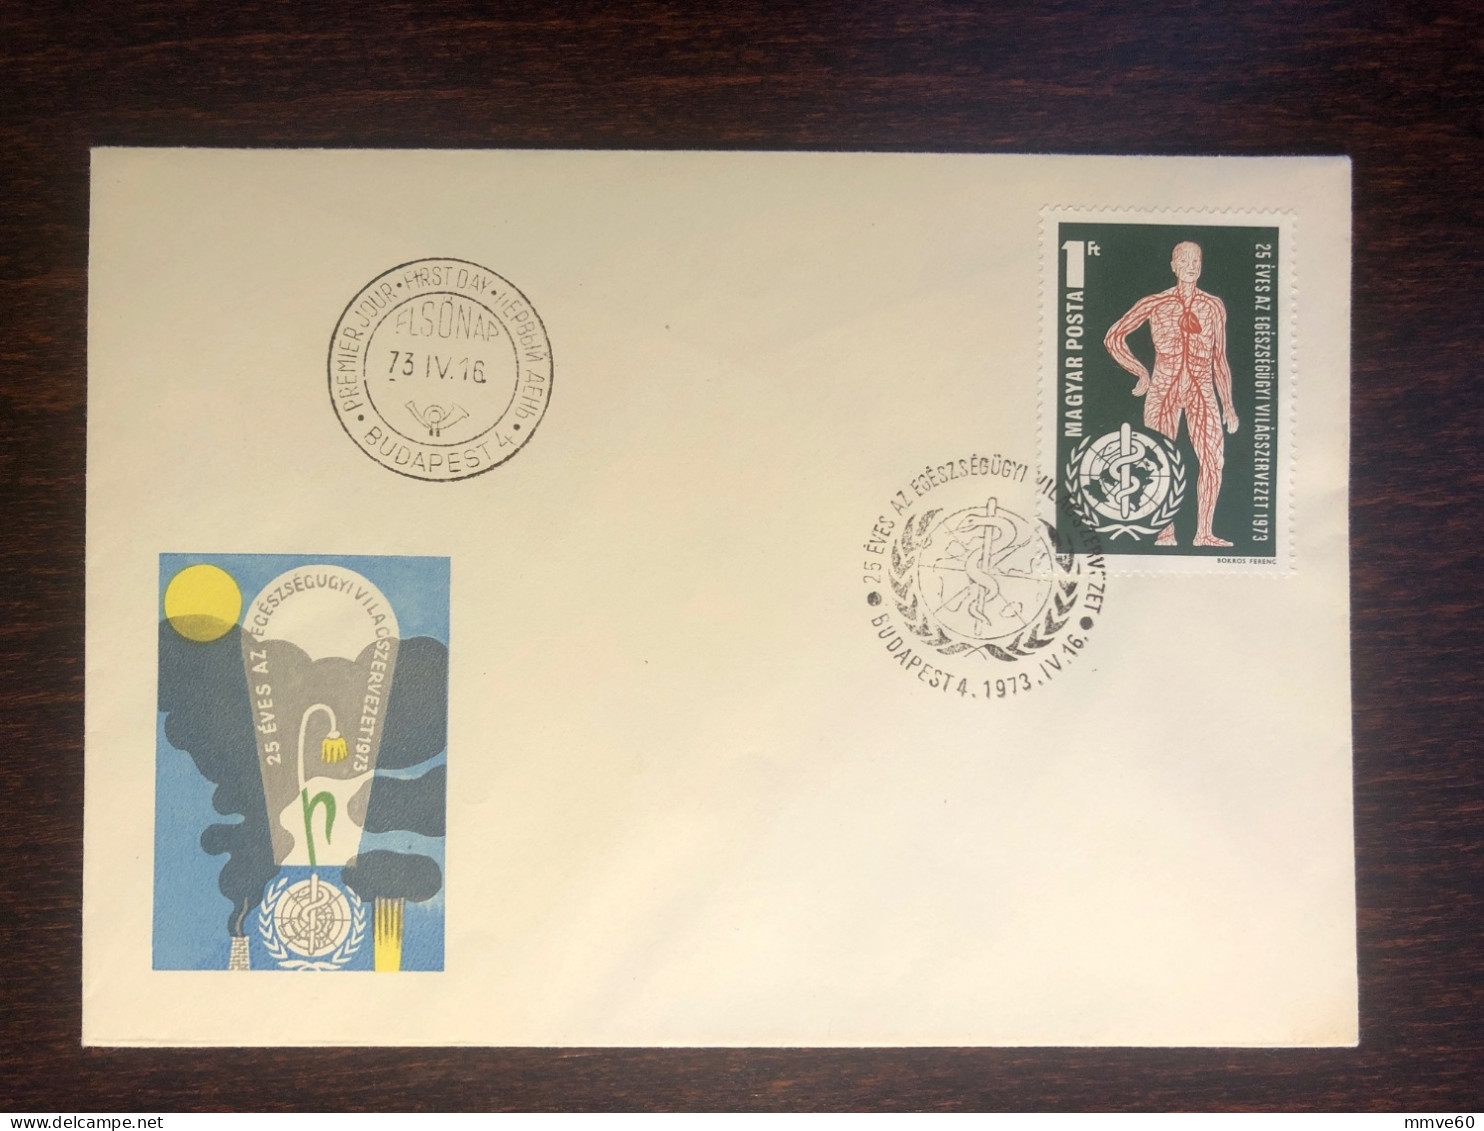 HUNGARY FDC COVER 1973 YEAR CARDIOLOGY VASCULAR HEALTH MEDICINE STAMPS - FDC